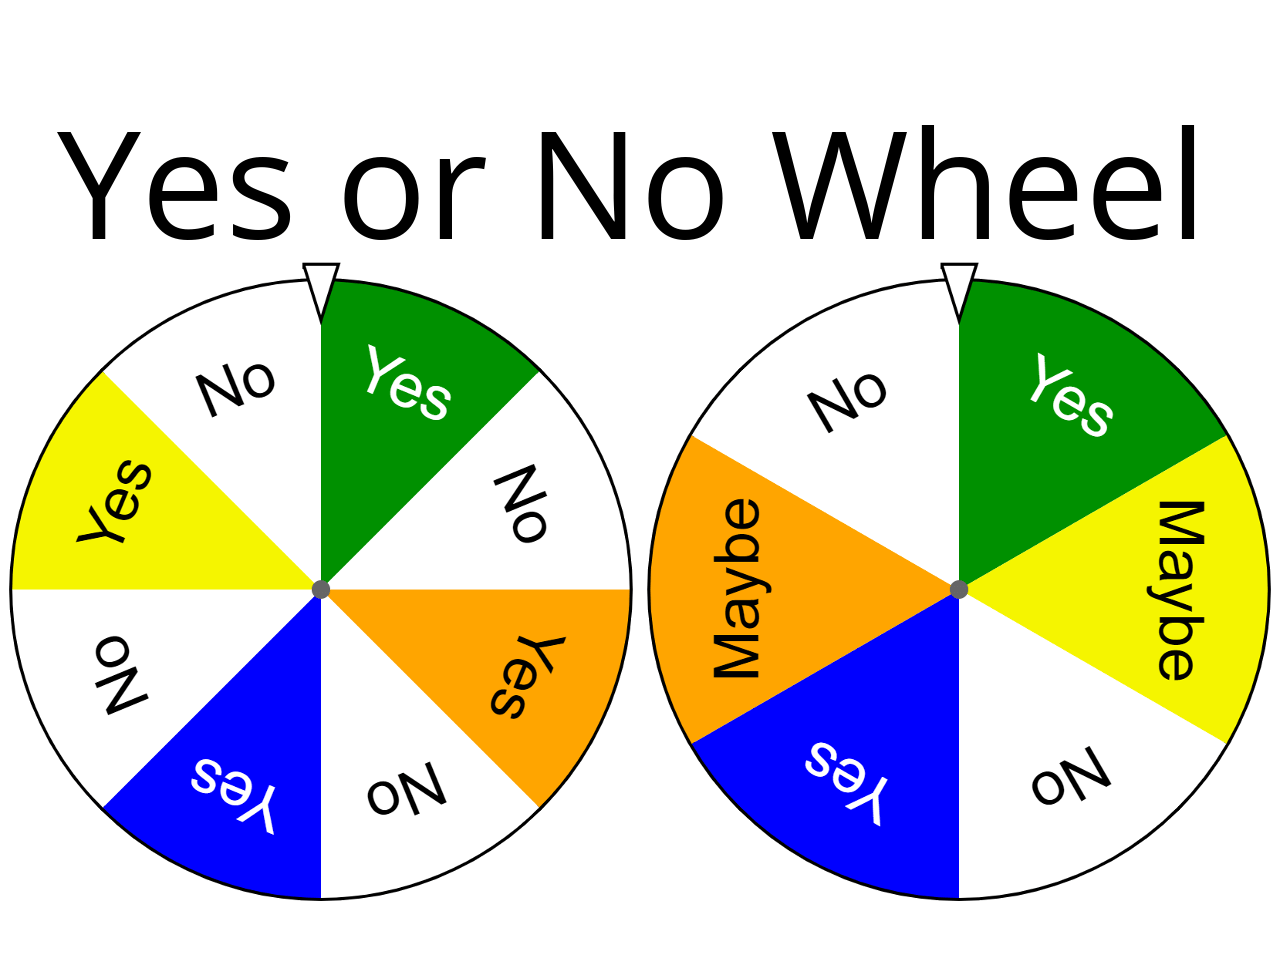 Yes, No, or Try Again  Spin the Wheel - Random Picker